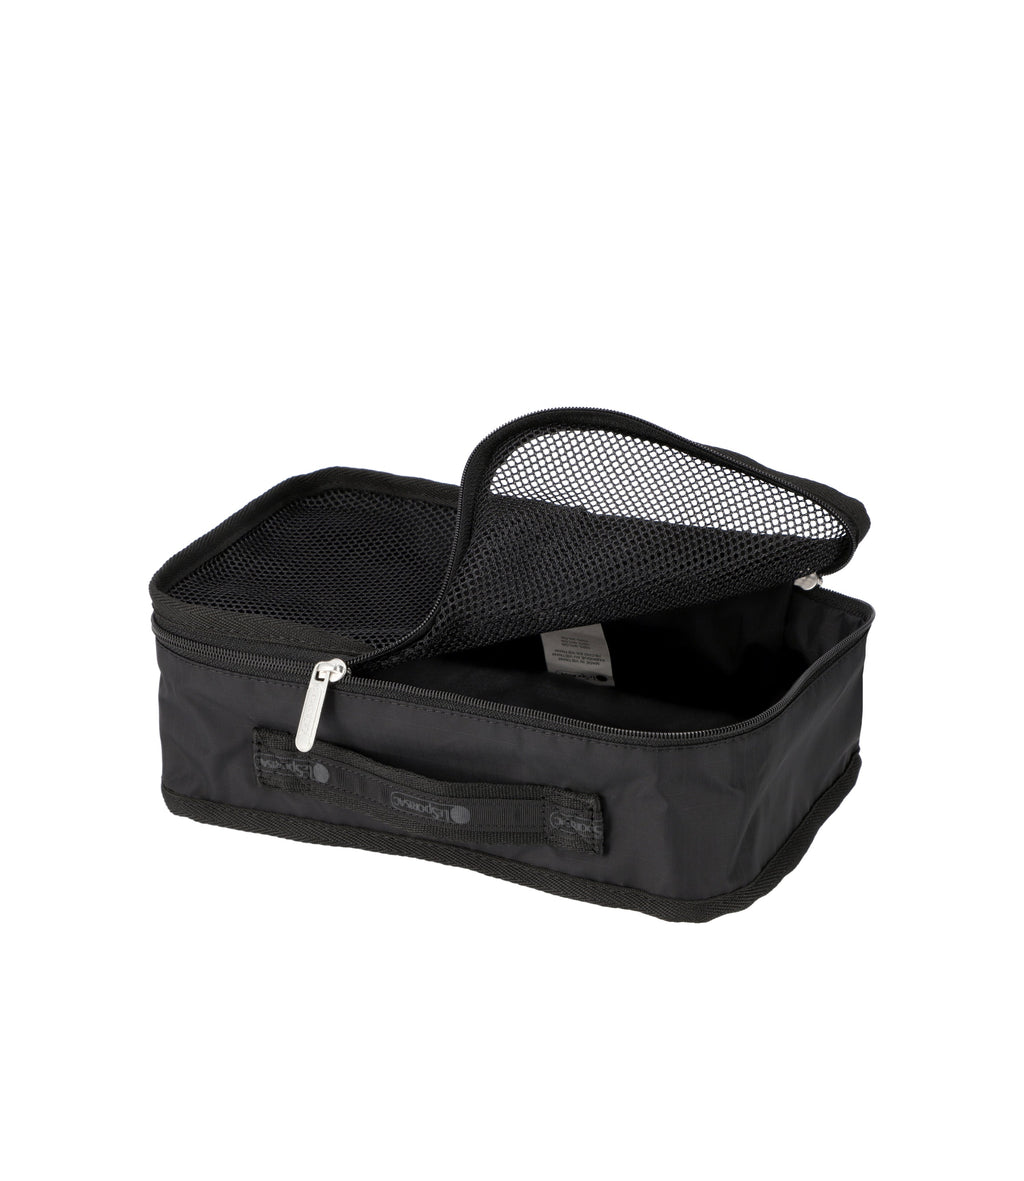 Small Packing Cube - Black solid – LeSportsac